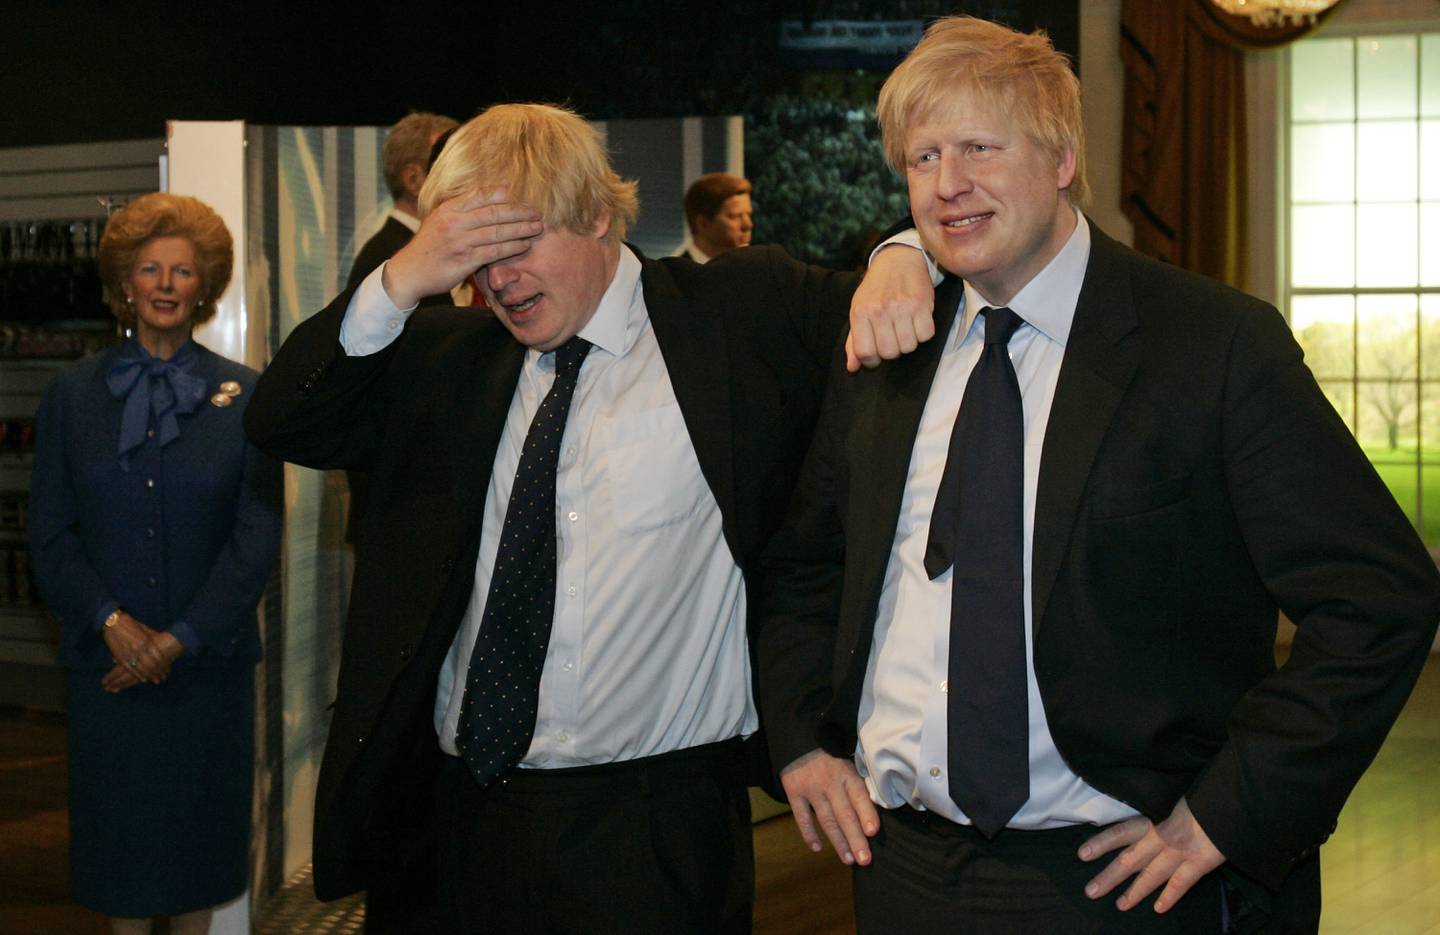 Then mayor of London Boris Johnson poses with a wax figure of himself at Madame Tussauds wax museum in London in 2009. AP Photo